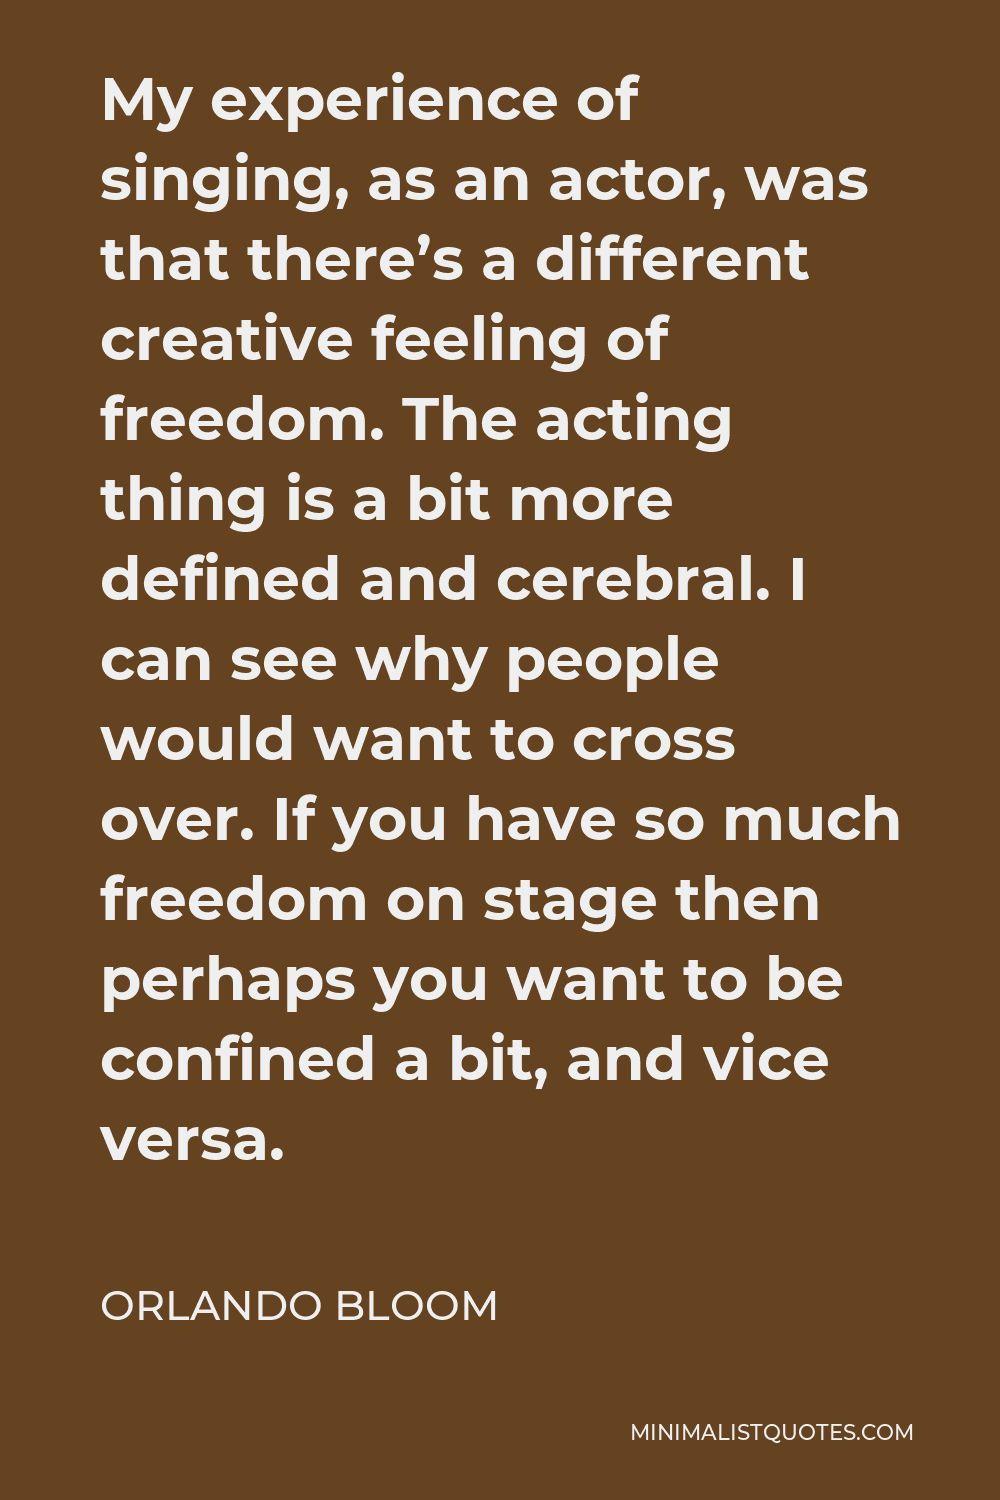 Orlando Bloom Quote - My experience of singing, as an actor, was that there’s a different creative feeling of freedom. The acting thing is a bit more defined and cerebral. I can see why people would want to cross over. If you have so much freedom on stage then perhaps you want to be confined a bit, and vice versa.